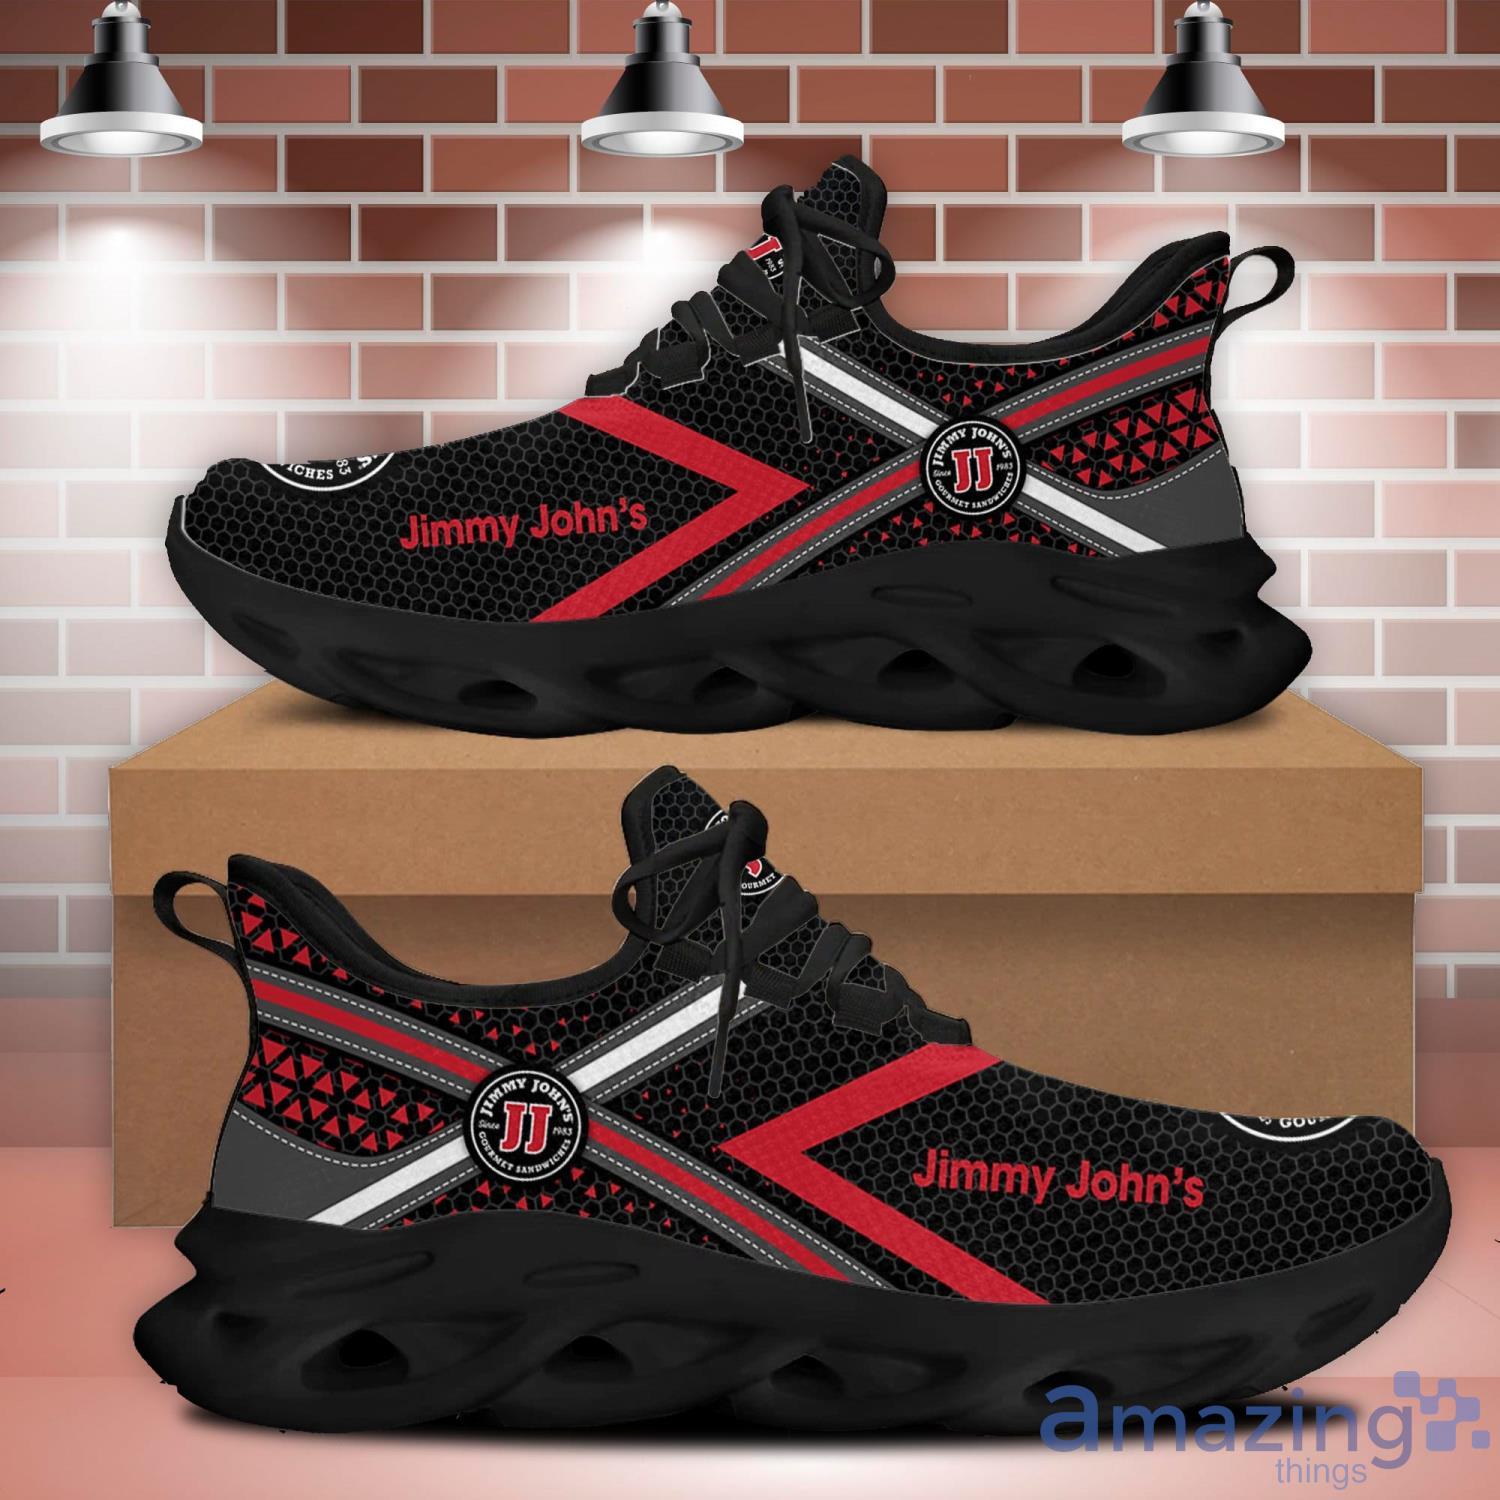 Jimmy John's Sneakers Max Soul Shoes Nice Sports Shoes For Men And Women Product Photo 1